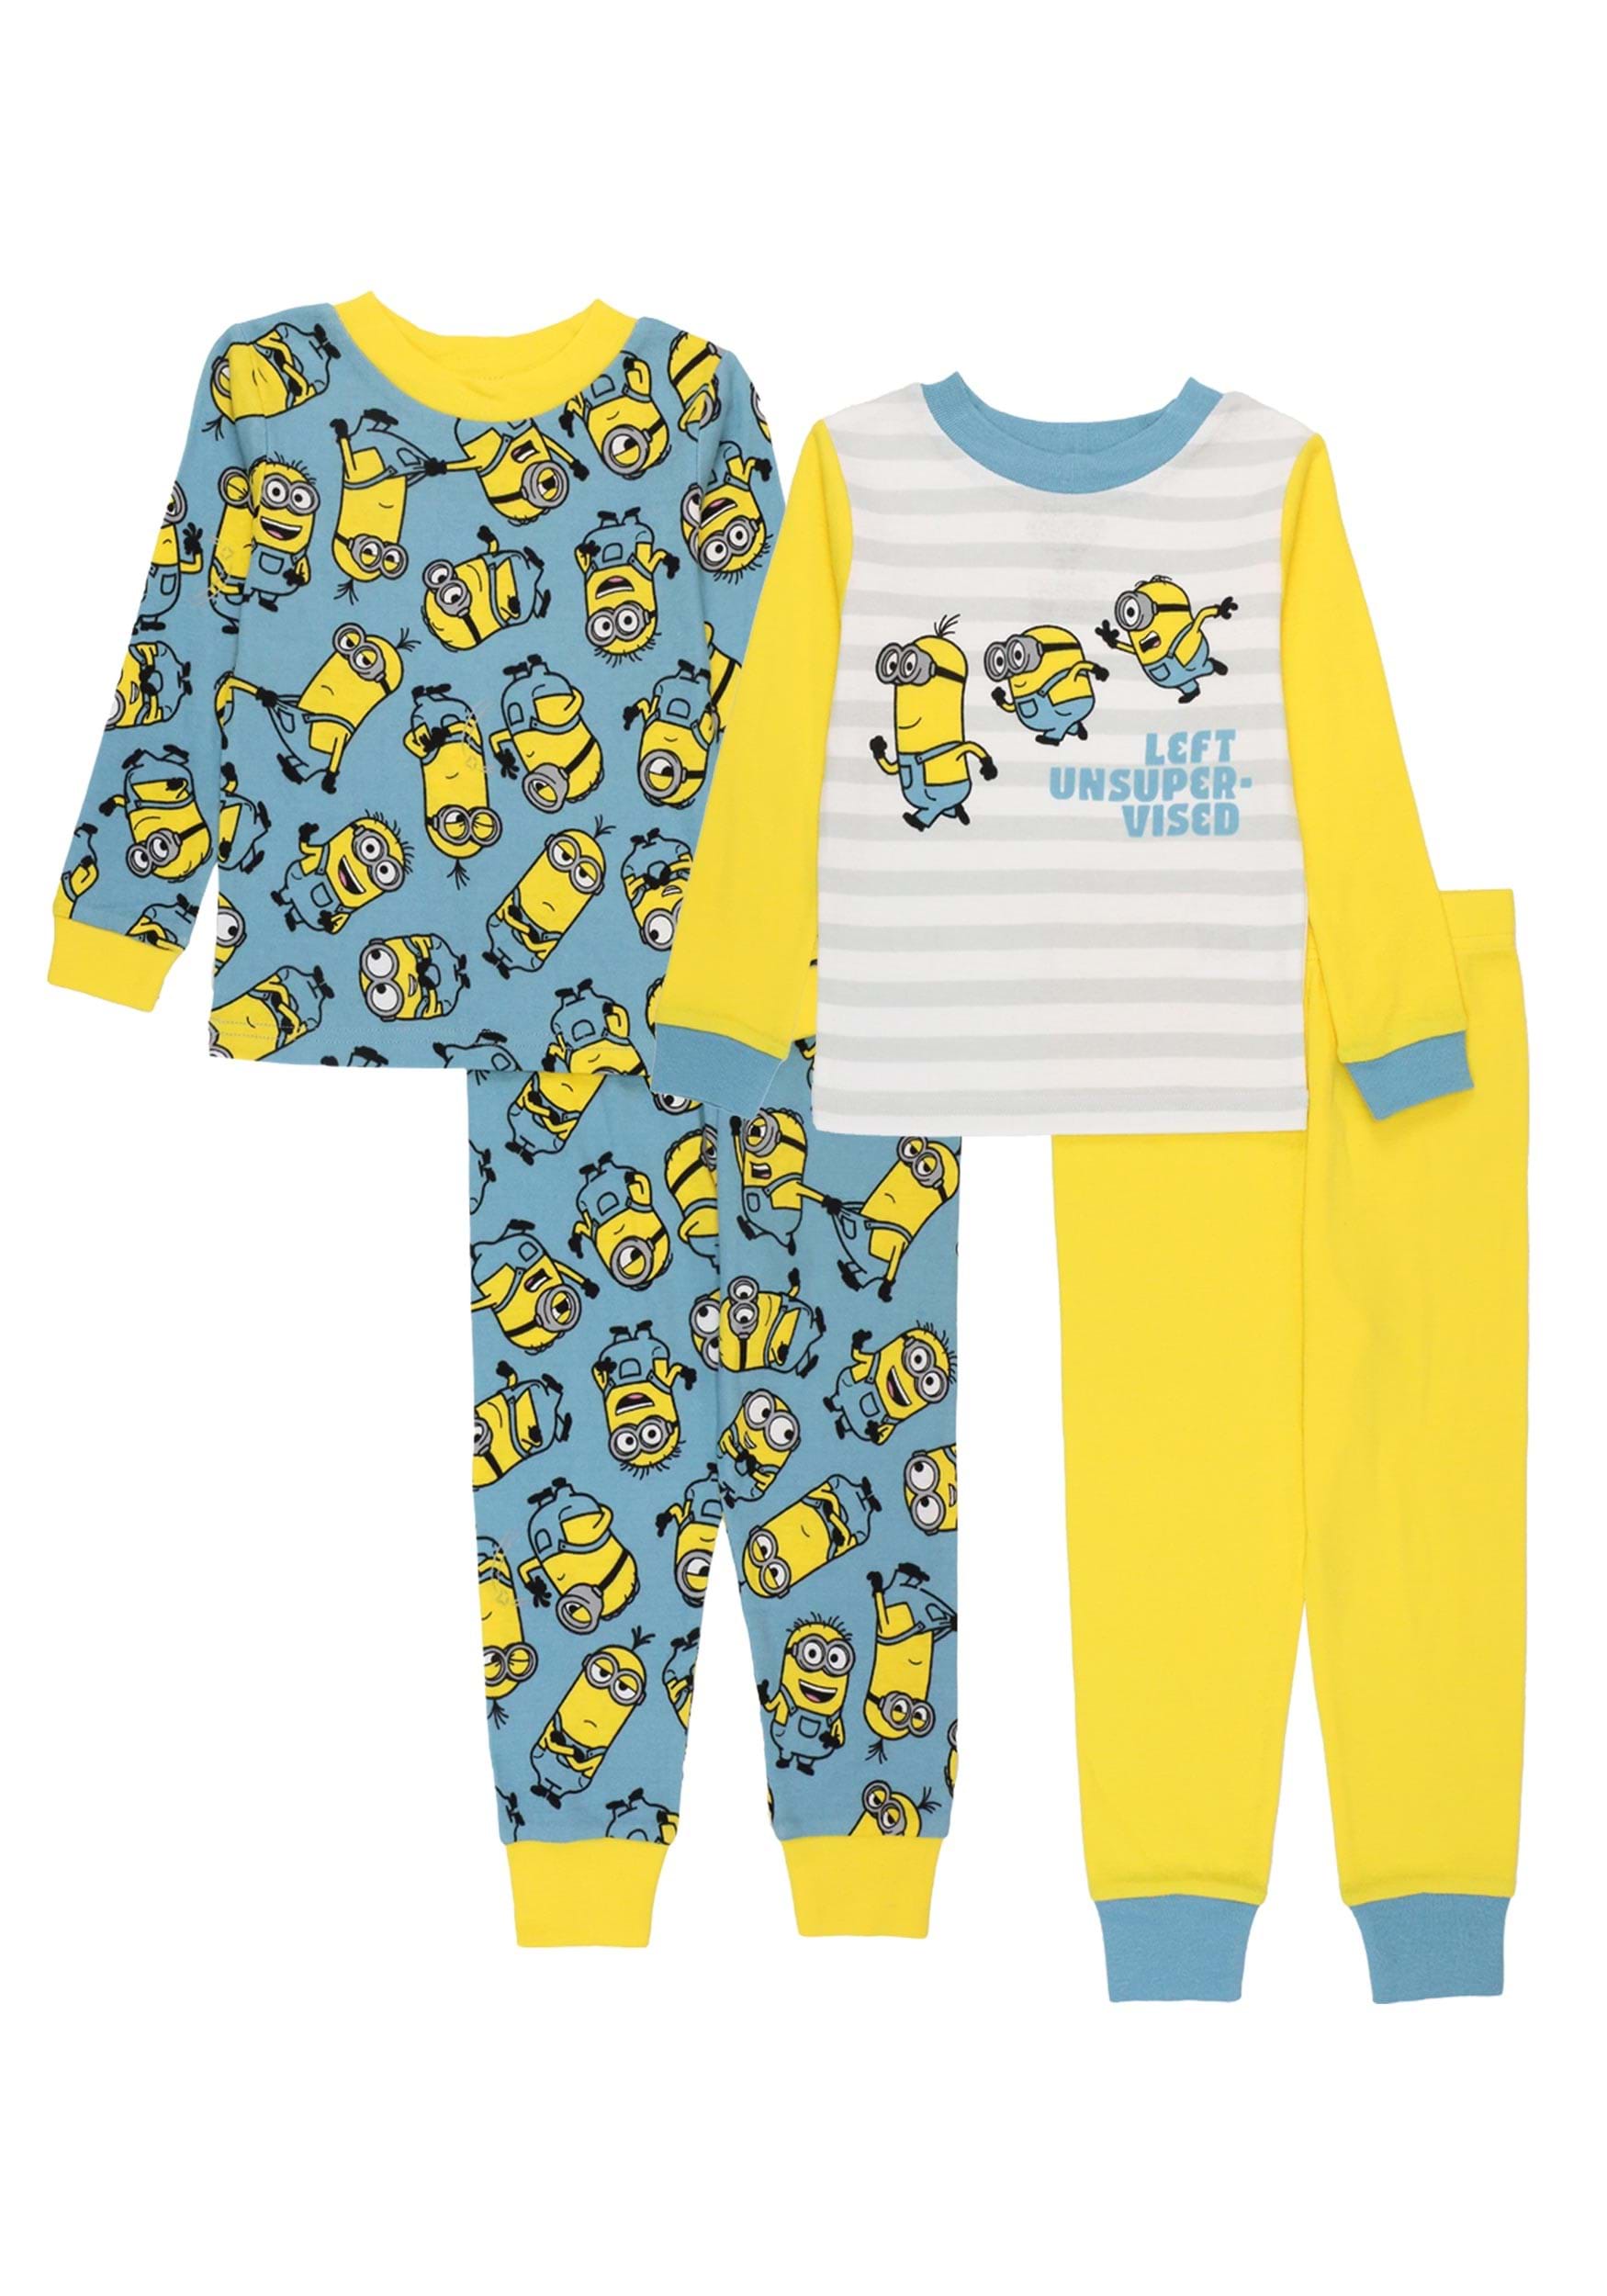 Discreet banner stopcontact Toddler Boys 4 Piece Unsupervised Minions Pajama